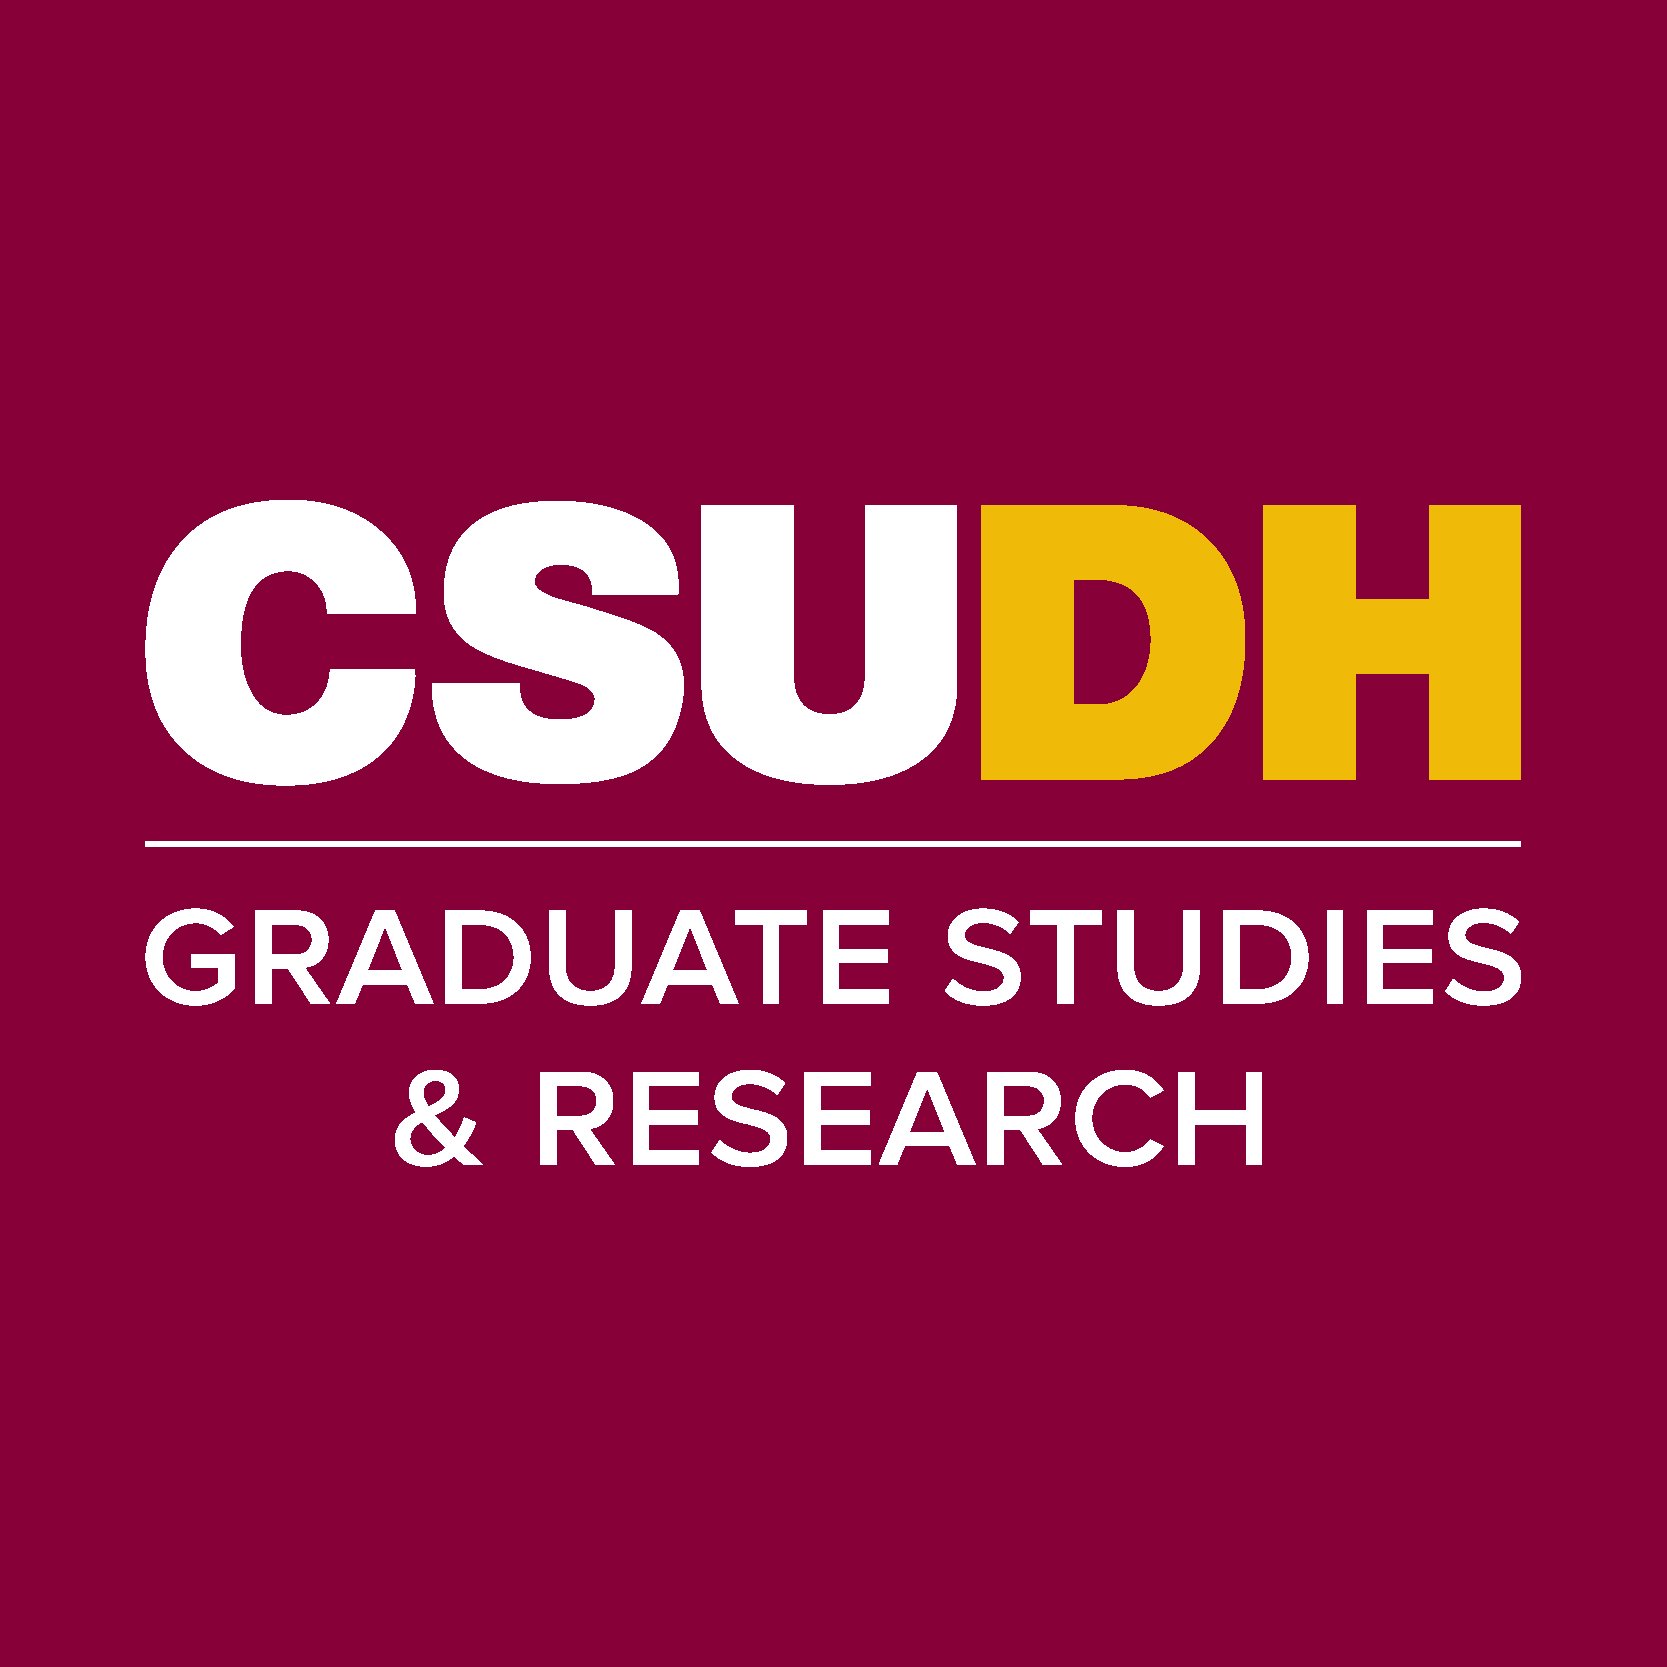 CSUDH Graduate Studies and Research provides an ideal setting for advanced study. 
Undergrad Summer Research Program https://t.co/yglWZ1Hb7k